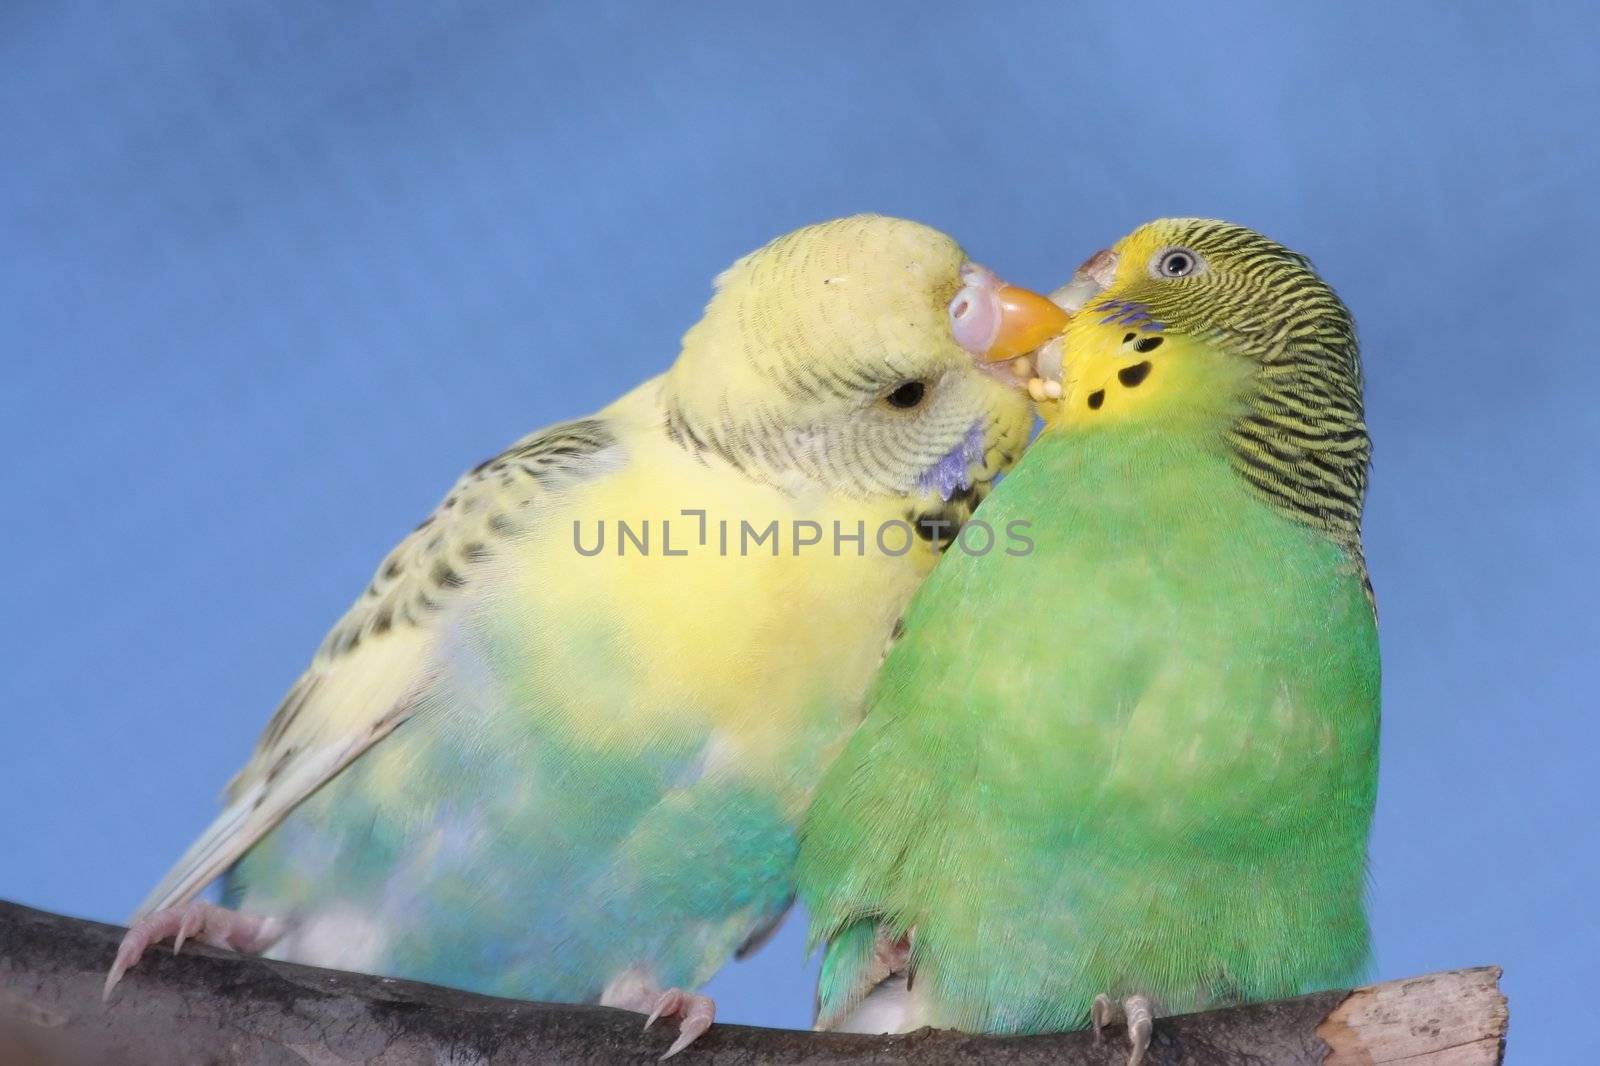 Breeding pair of budgies with the male budgie bird feeding his mate